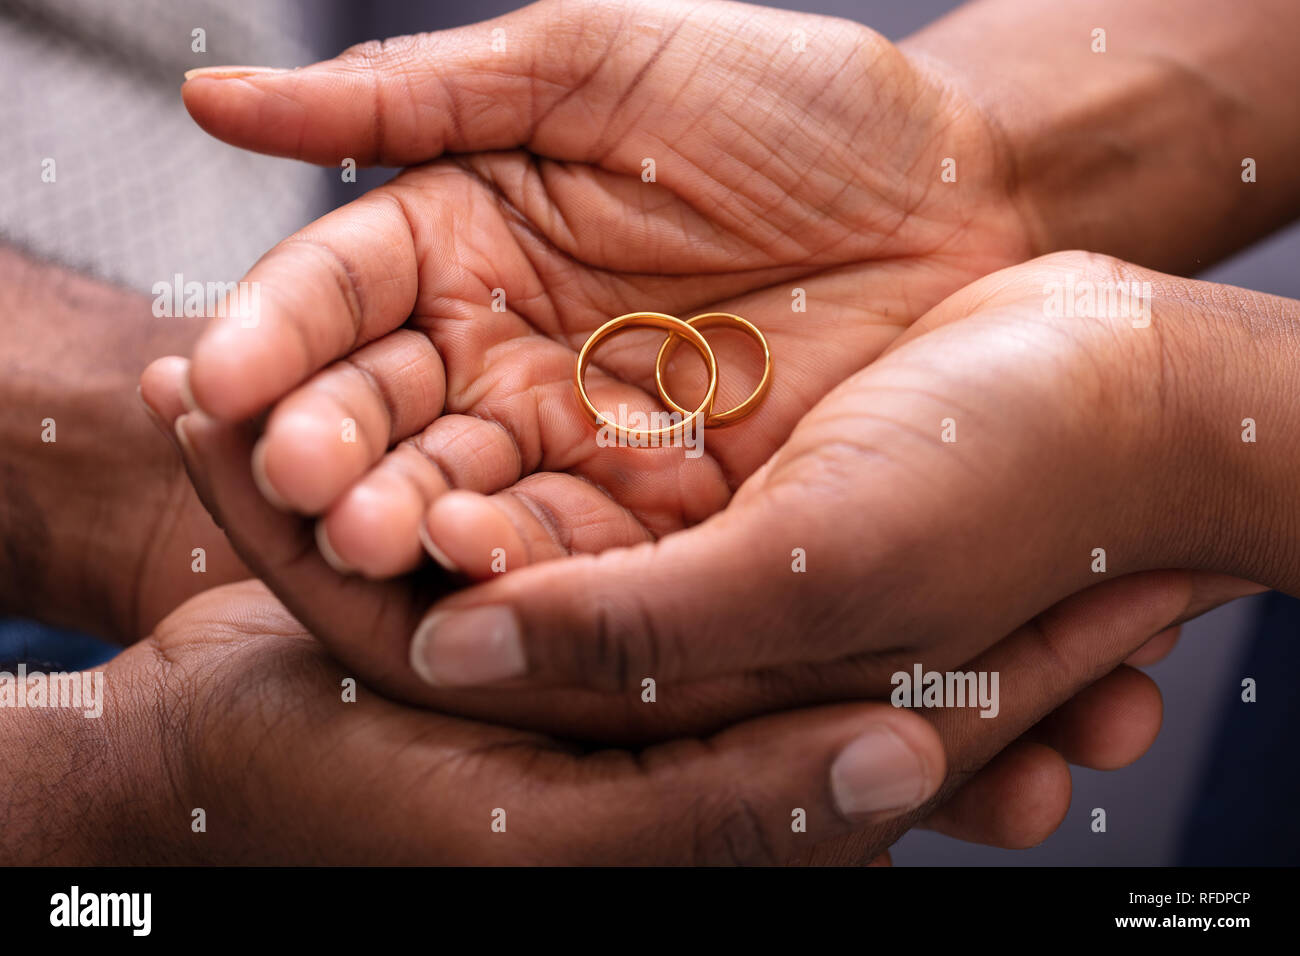 Man And Woman's Hand With Pair Of Golden Engagement Rings Stock Photo